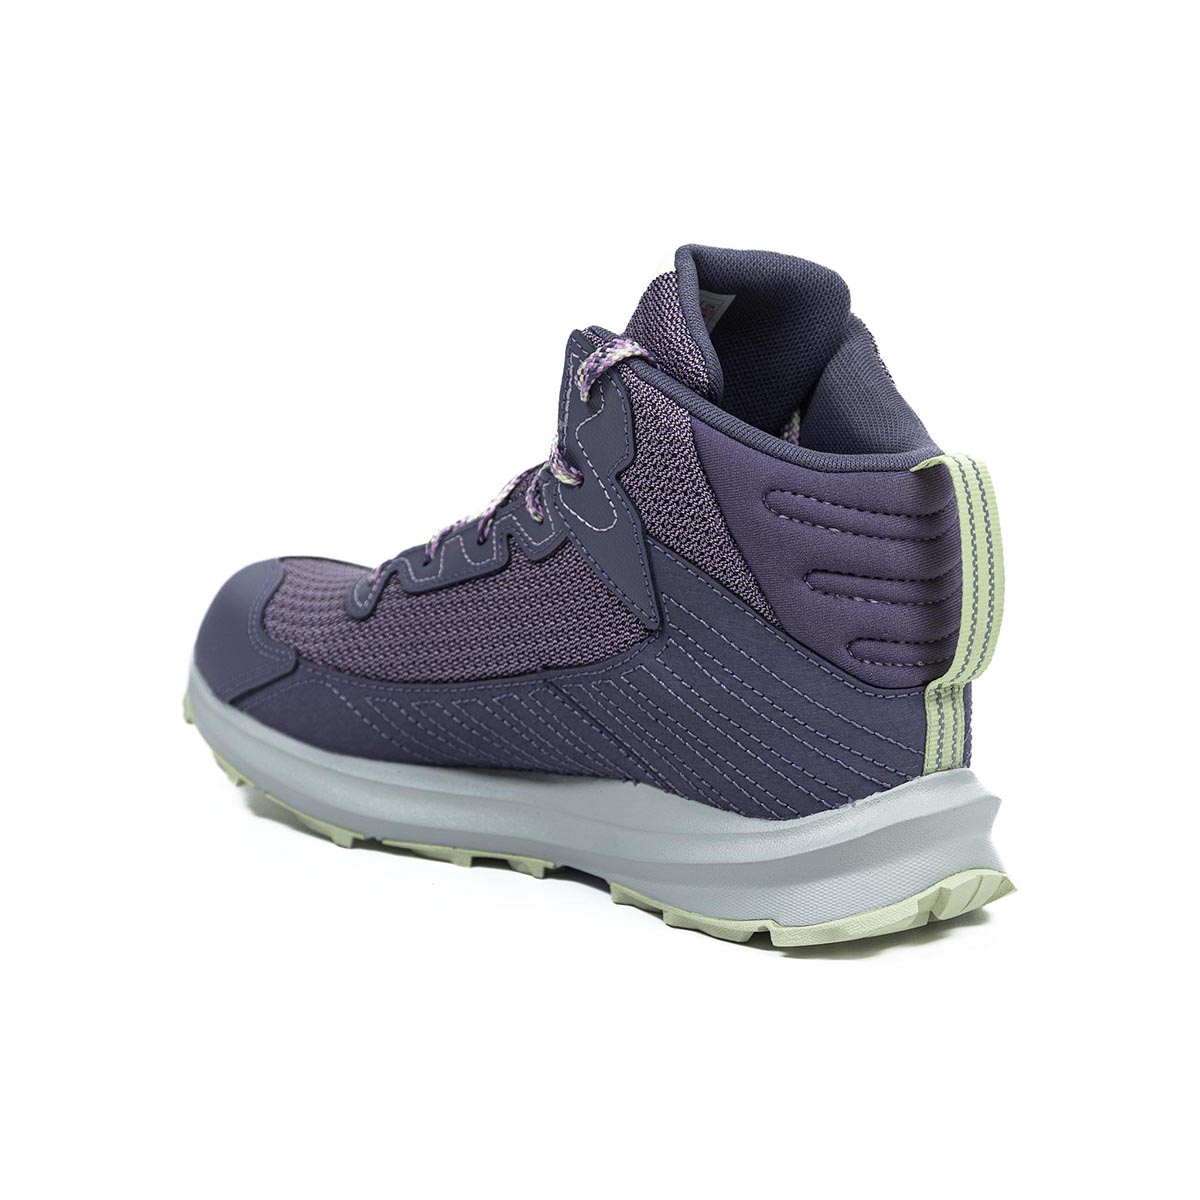 THE NORTH FACE - YOUTH FASTPACK WATERPROOF MID HIKING BOOTS